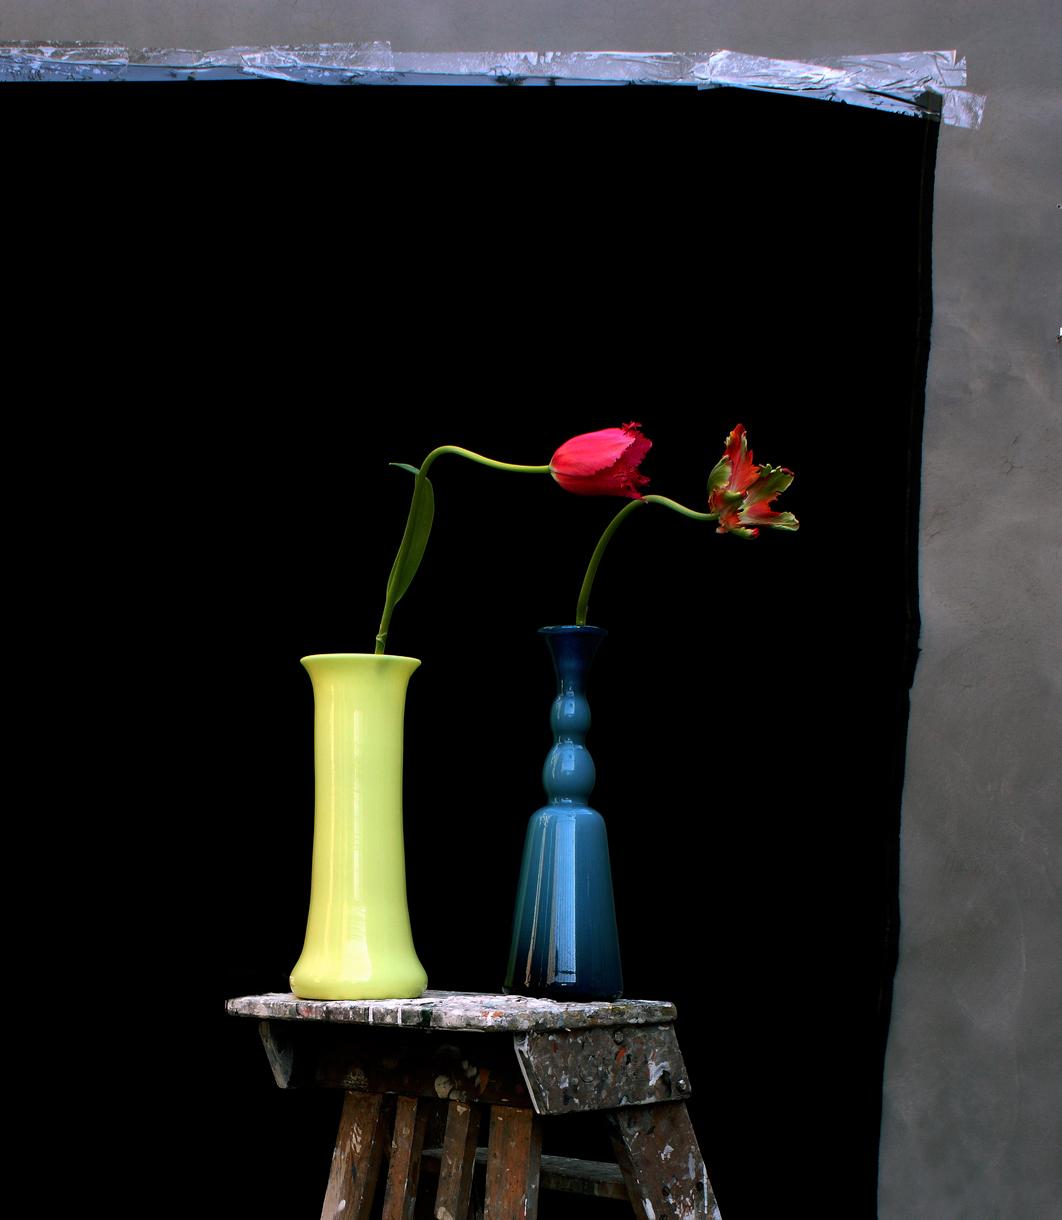 Still life with Tulips, a Ladder and a Yellow Opalina Vase, Antwerp, Color Photo - Photograph by Michael James O’Brien